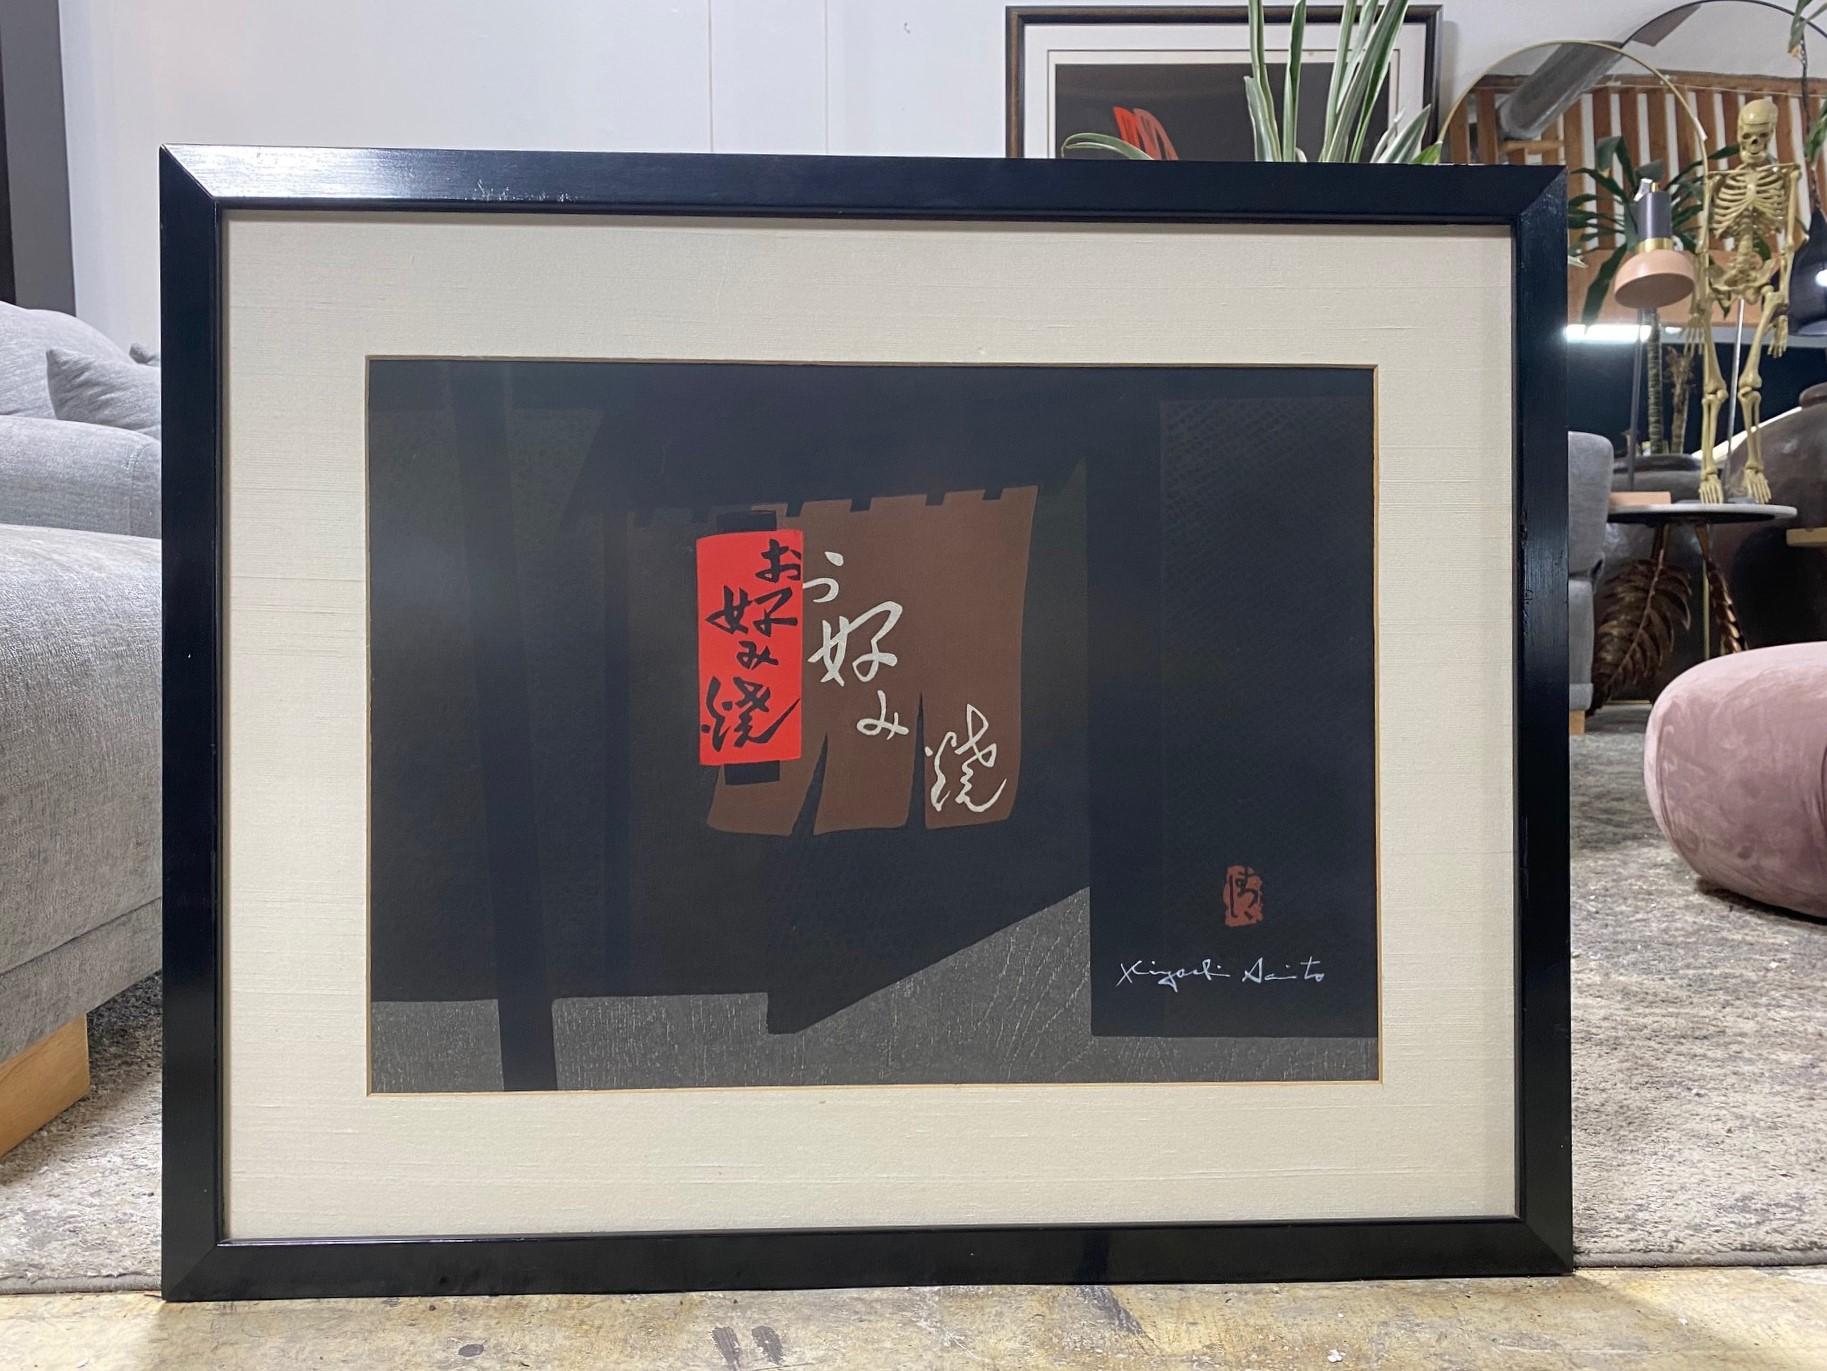 A beautifully designed and composed woodblock print by famed Japanese artist/ printmaker Kiyoshi Saito.  Many consider Saito to be one of the most important, if not the most important, contemporary Japanese printmakers of the 20th century. This